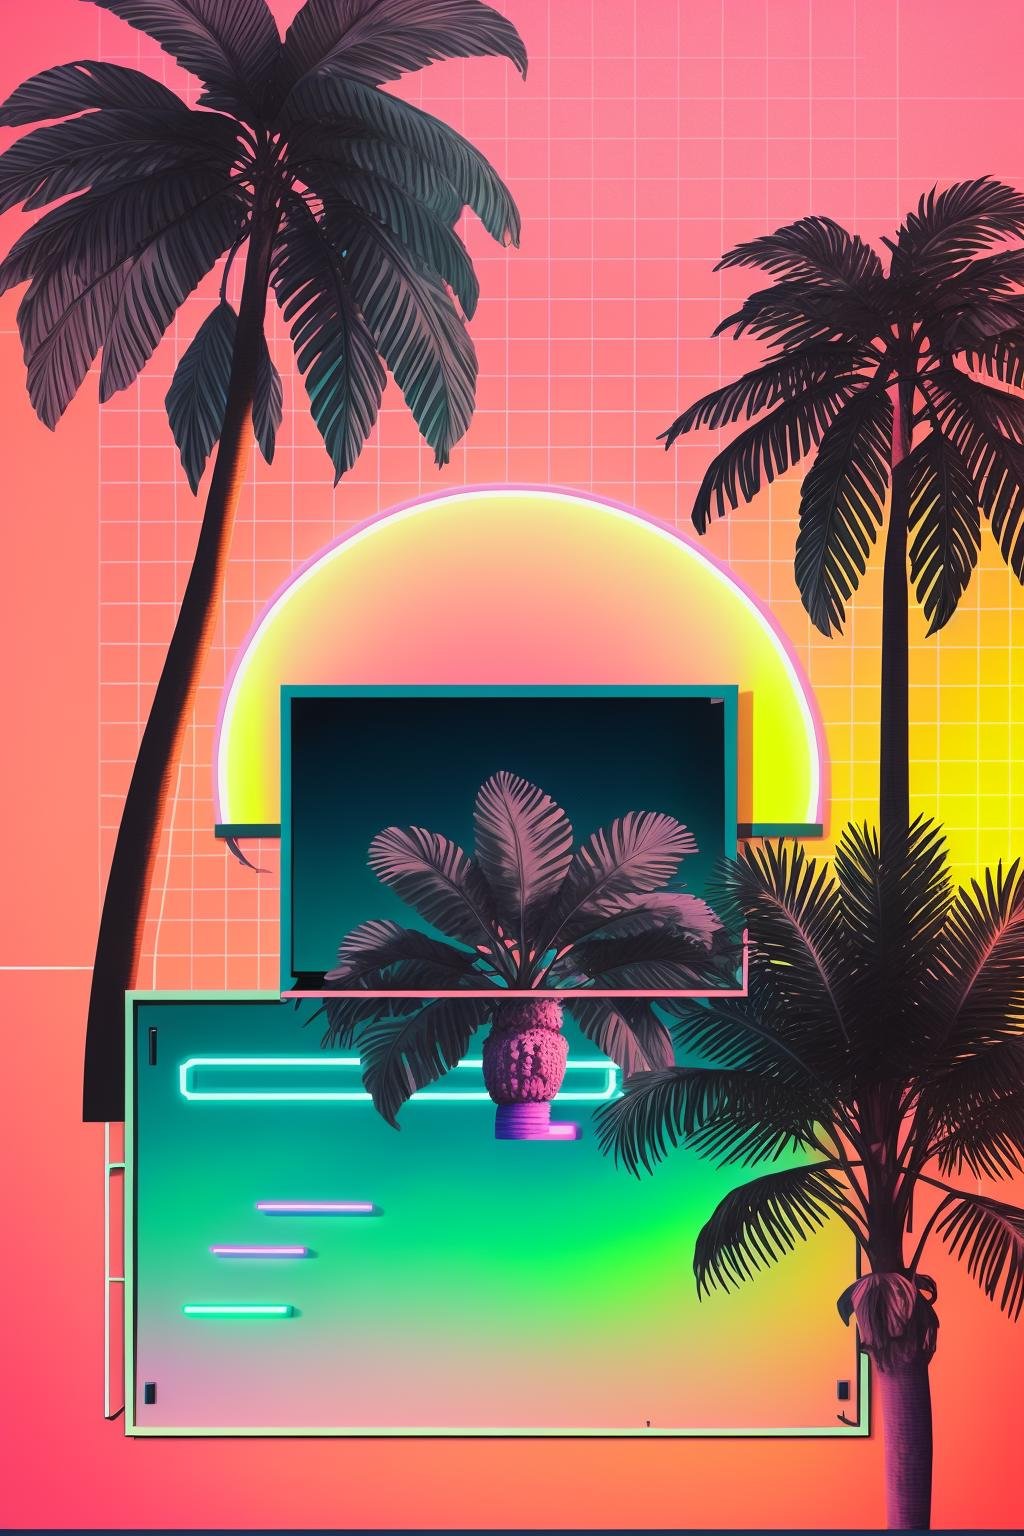 (( a neon sunset with palm trees and a neon grid )),  vapor_graphic